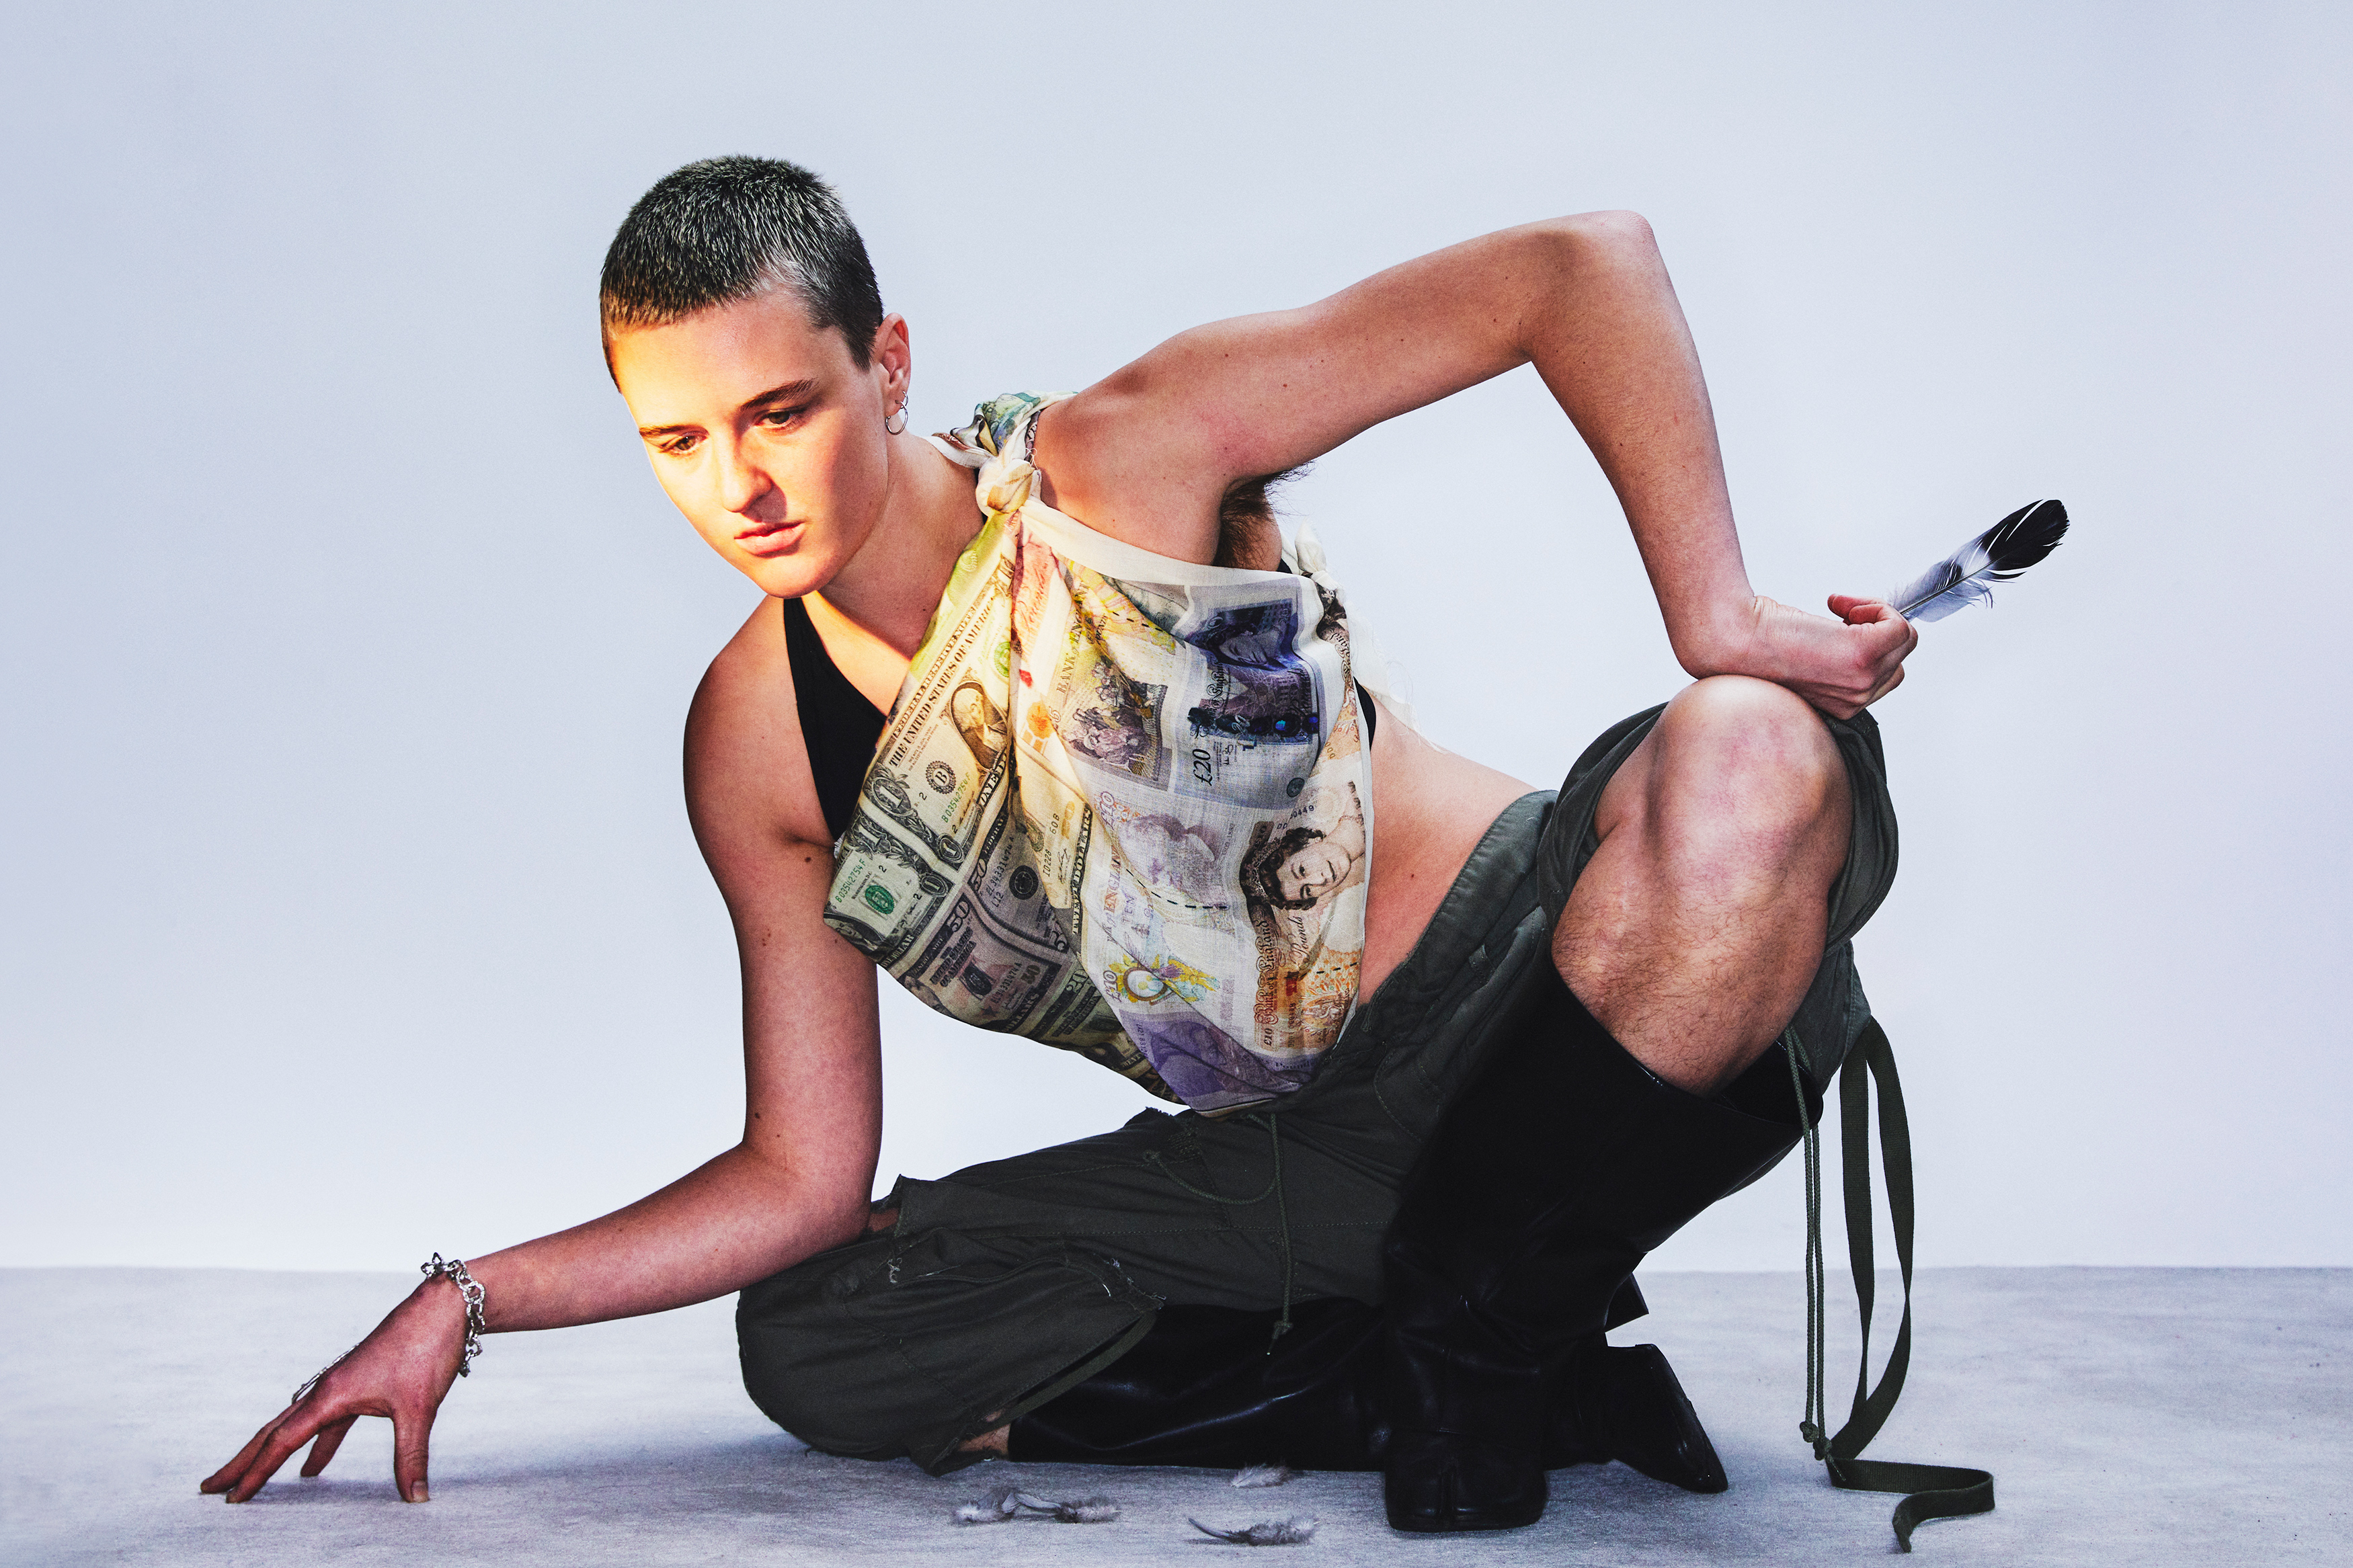 the musician tiberius b with a buzzed blonde-brown haircut, crouched on the ground in a creative pose, wearing a silk scarf printed with british pound notes as a top, shorts and black socks. they carry a pigeon feather in their hand.